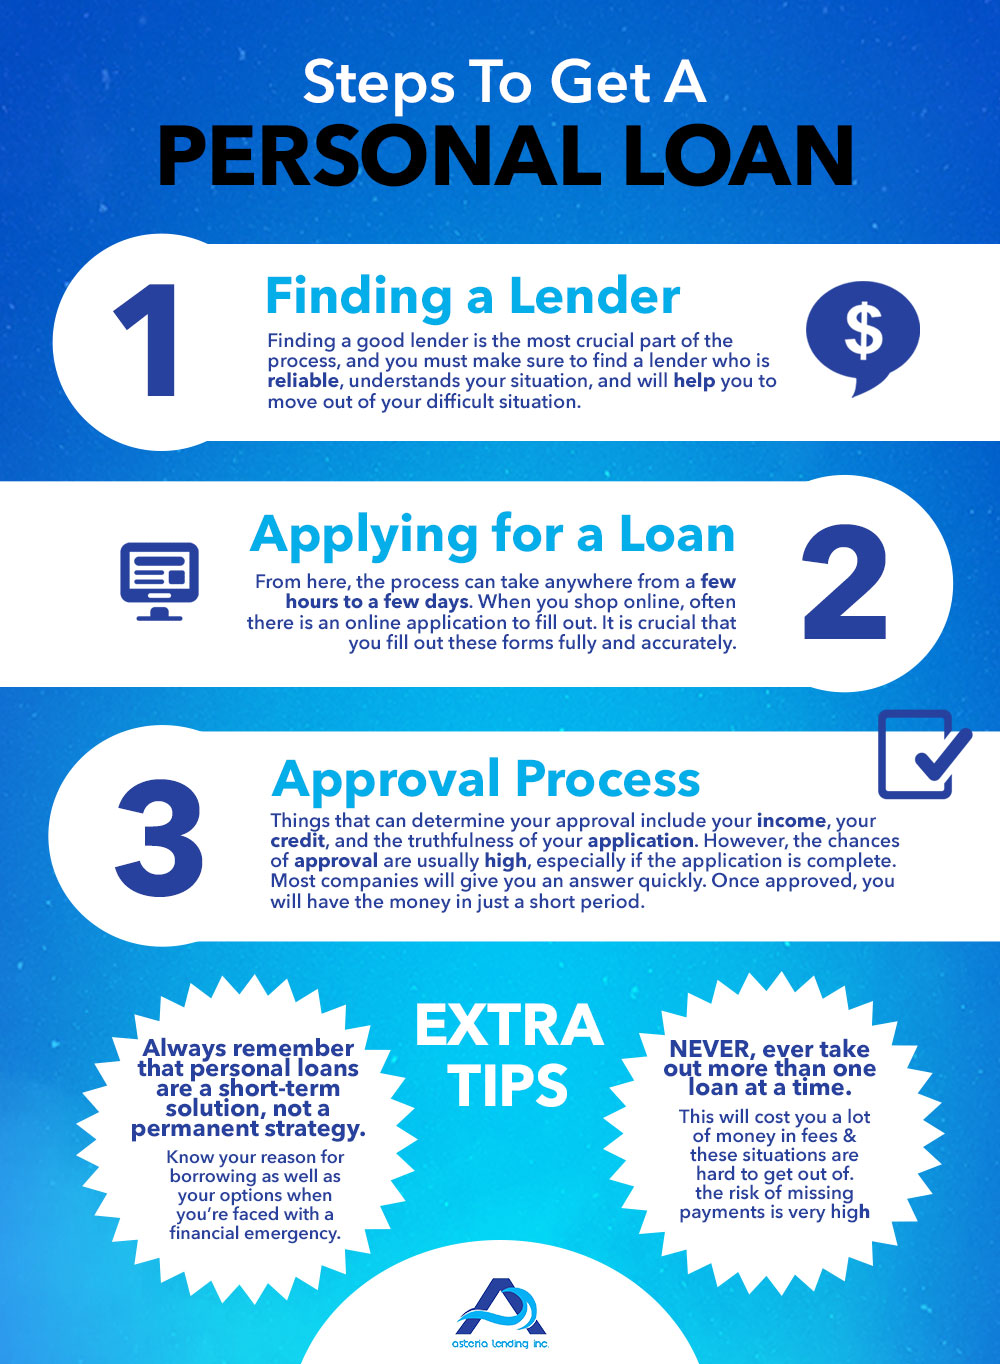 Personal Loans in the Philippines in 2019 | Asteria Lending